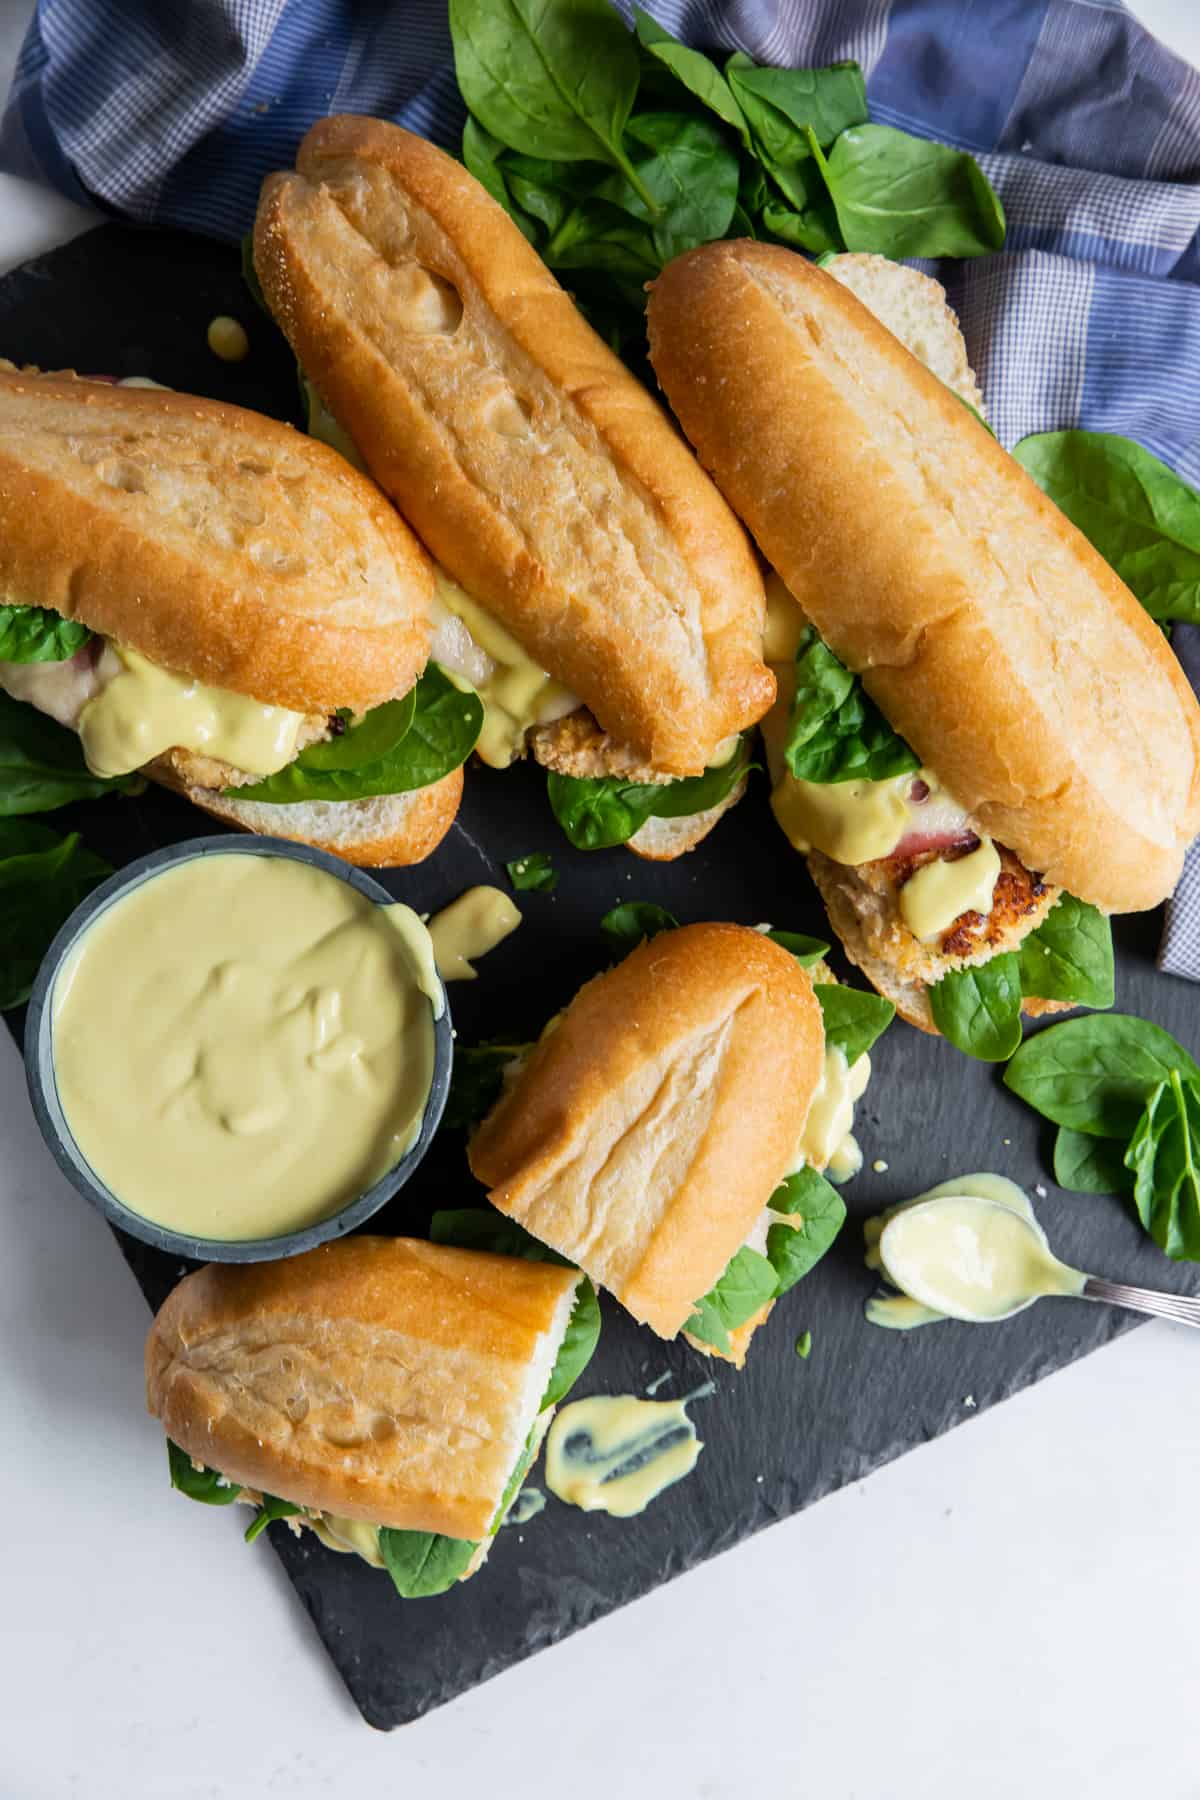 Chicken, ham and swiss sandwiches with spinach with honey mustard sauce.